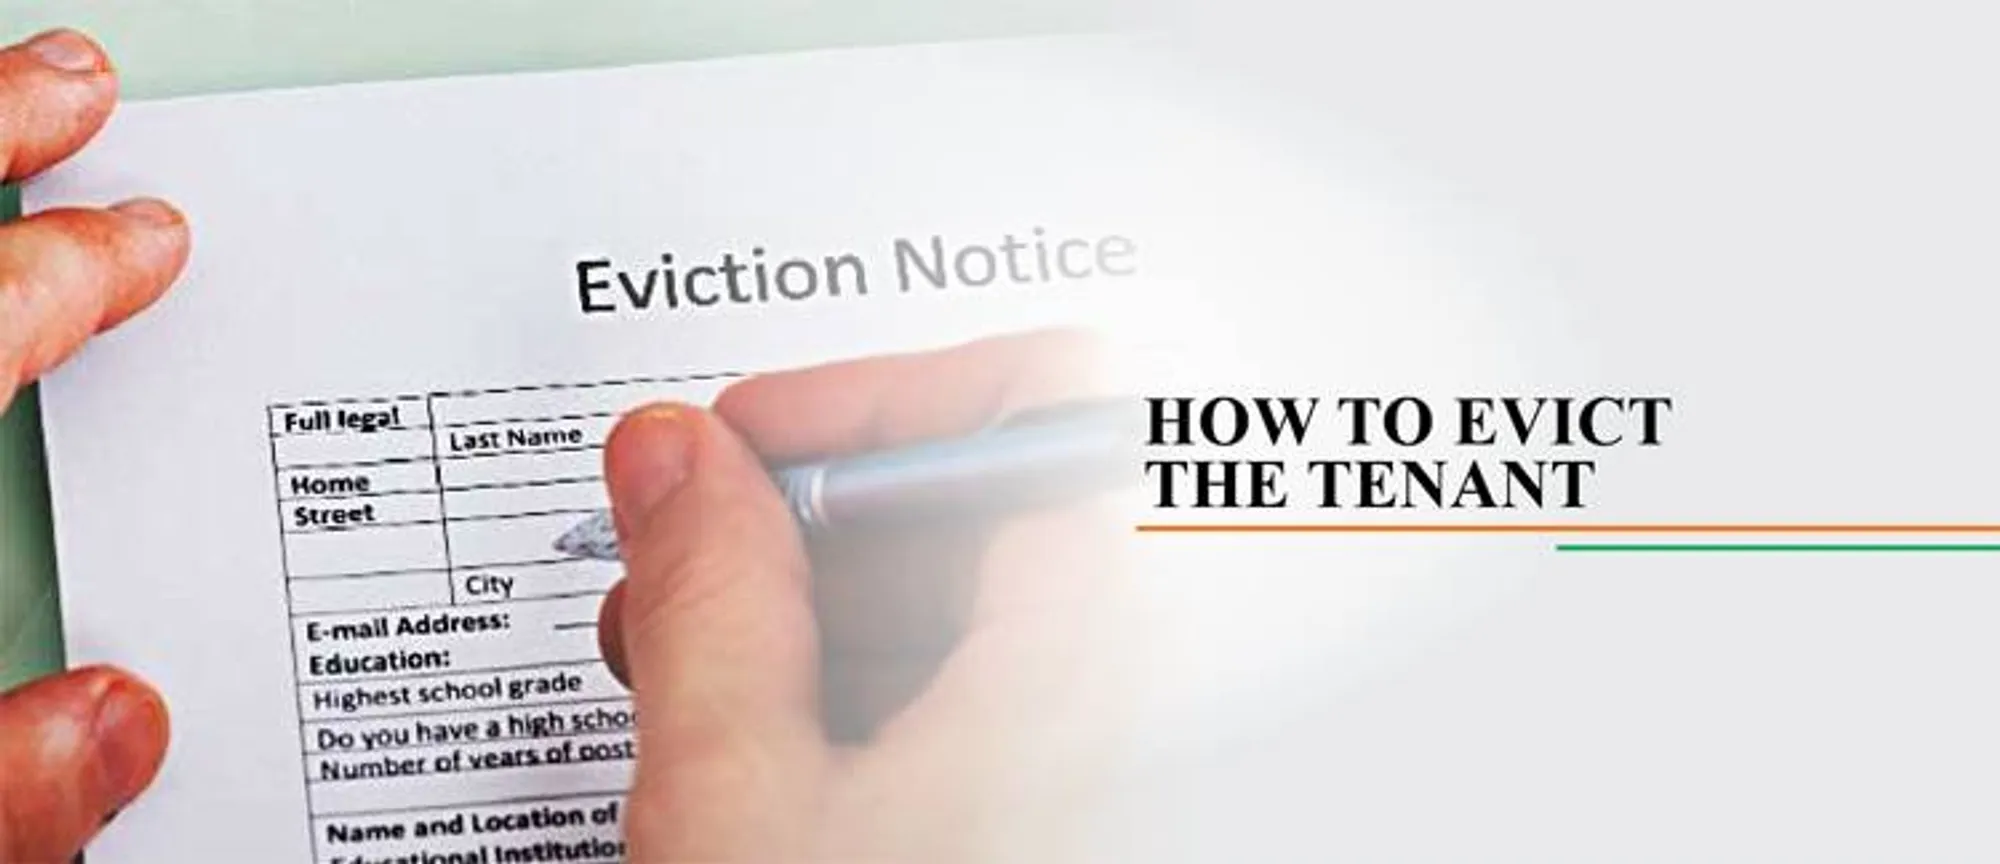 How to Evict the Tenant